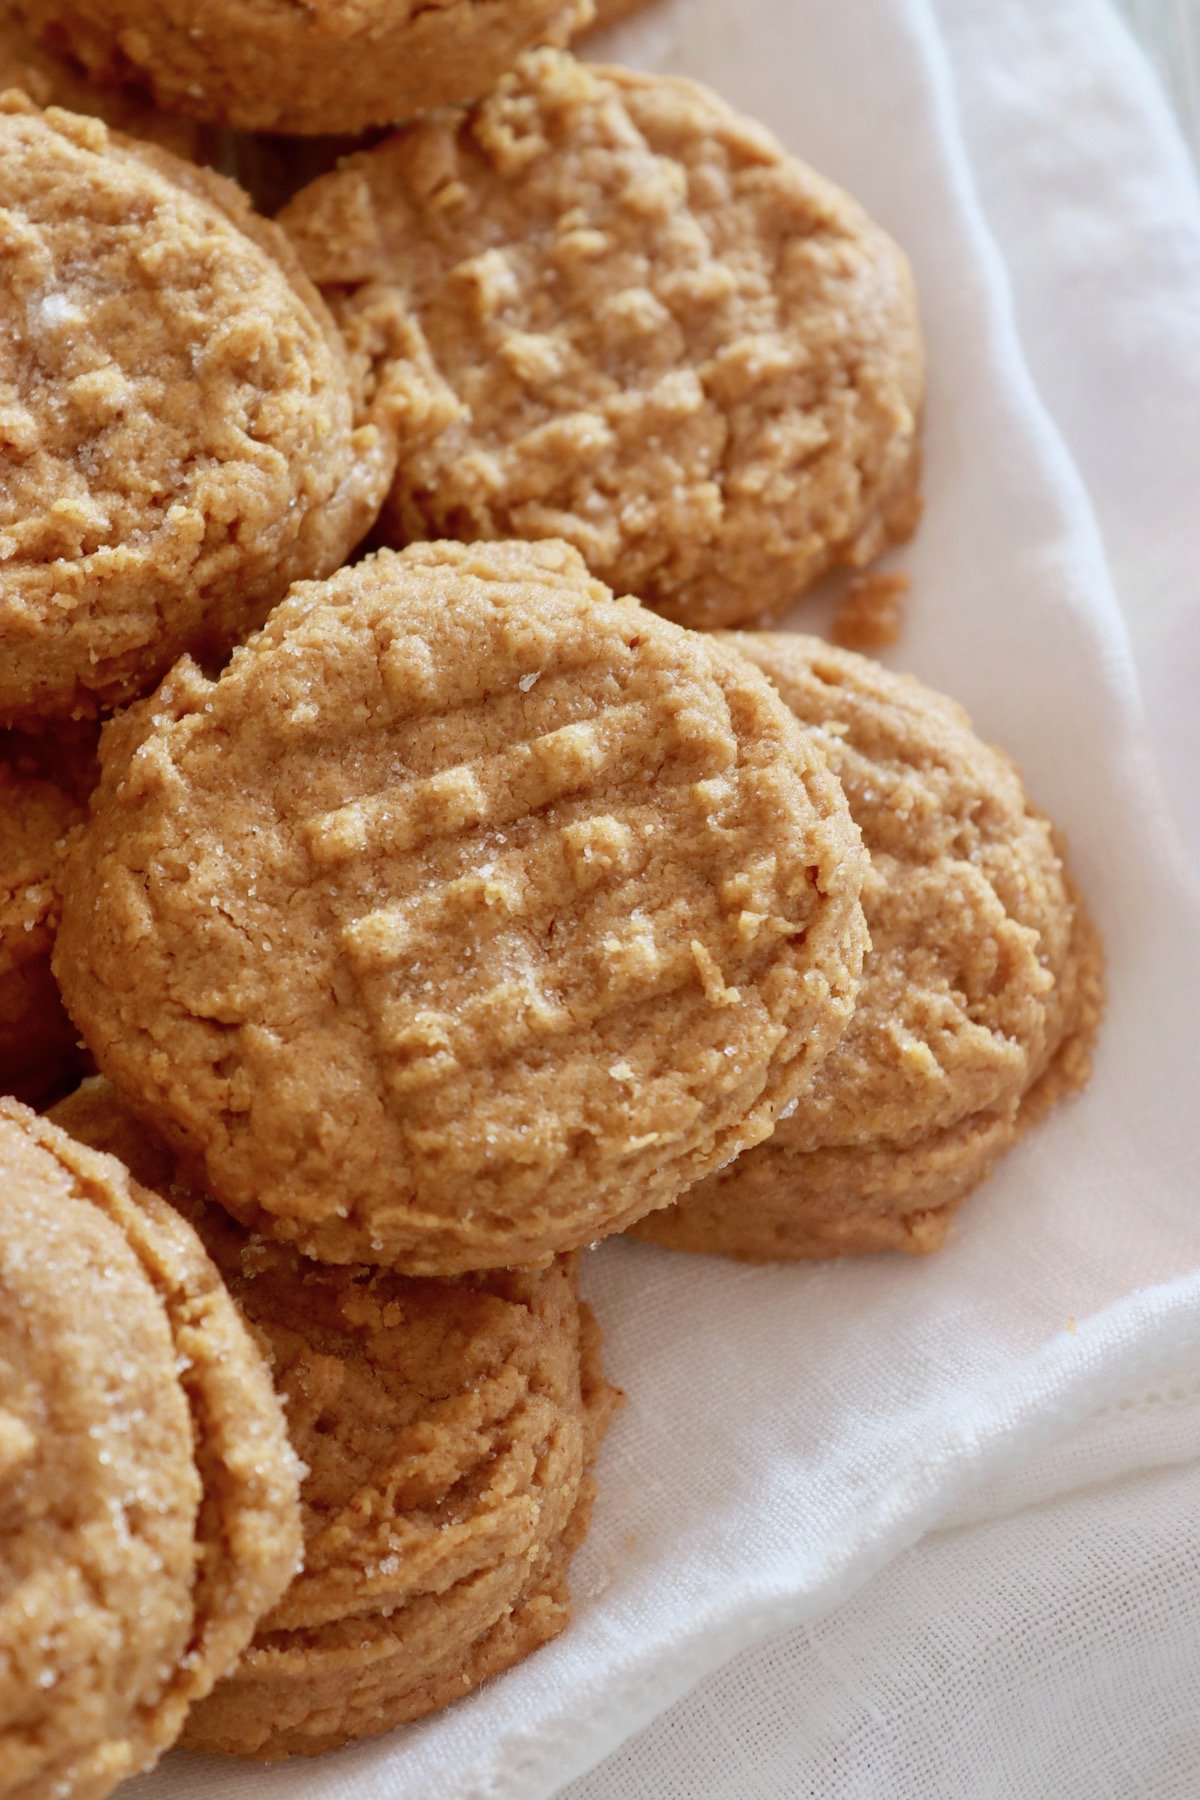 Pile of peanut butter cookies with a fork indentation in each one on white cloth.